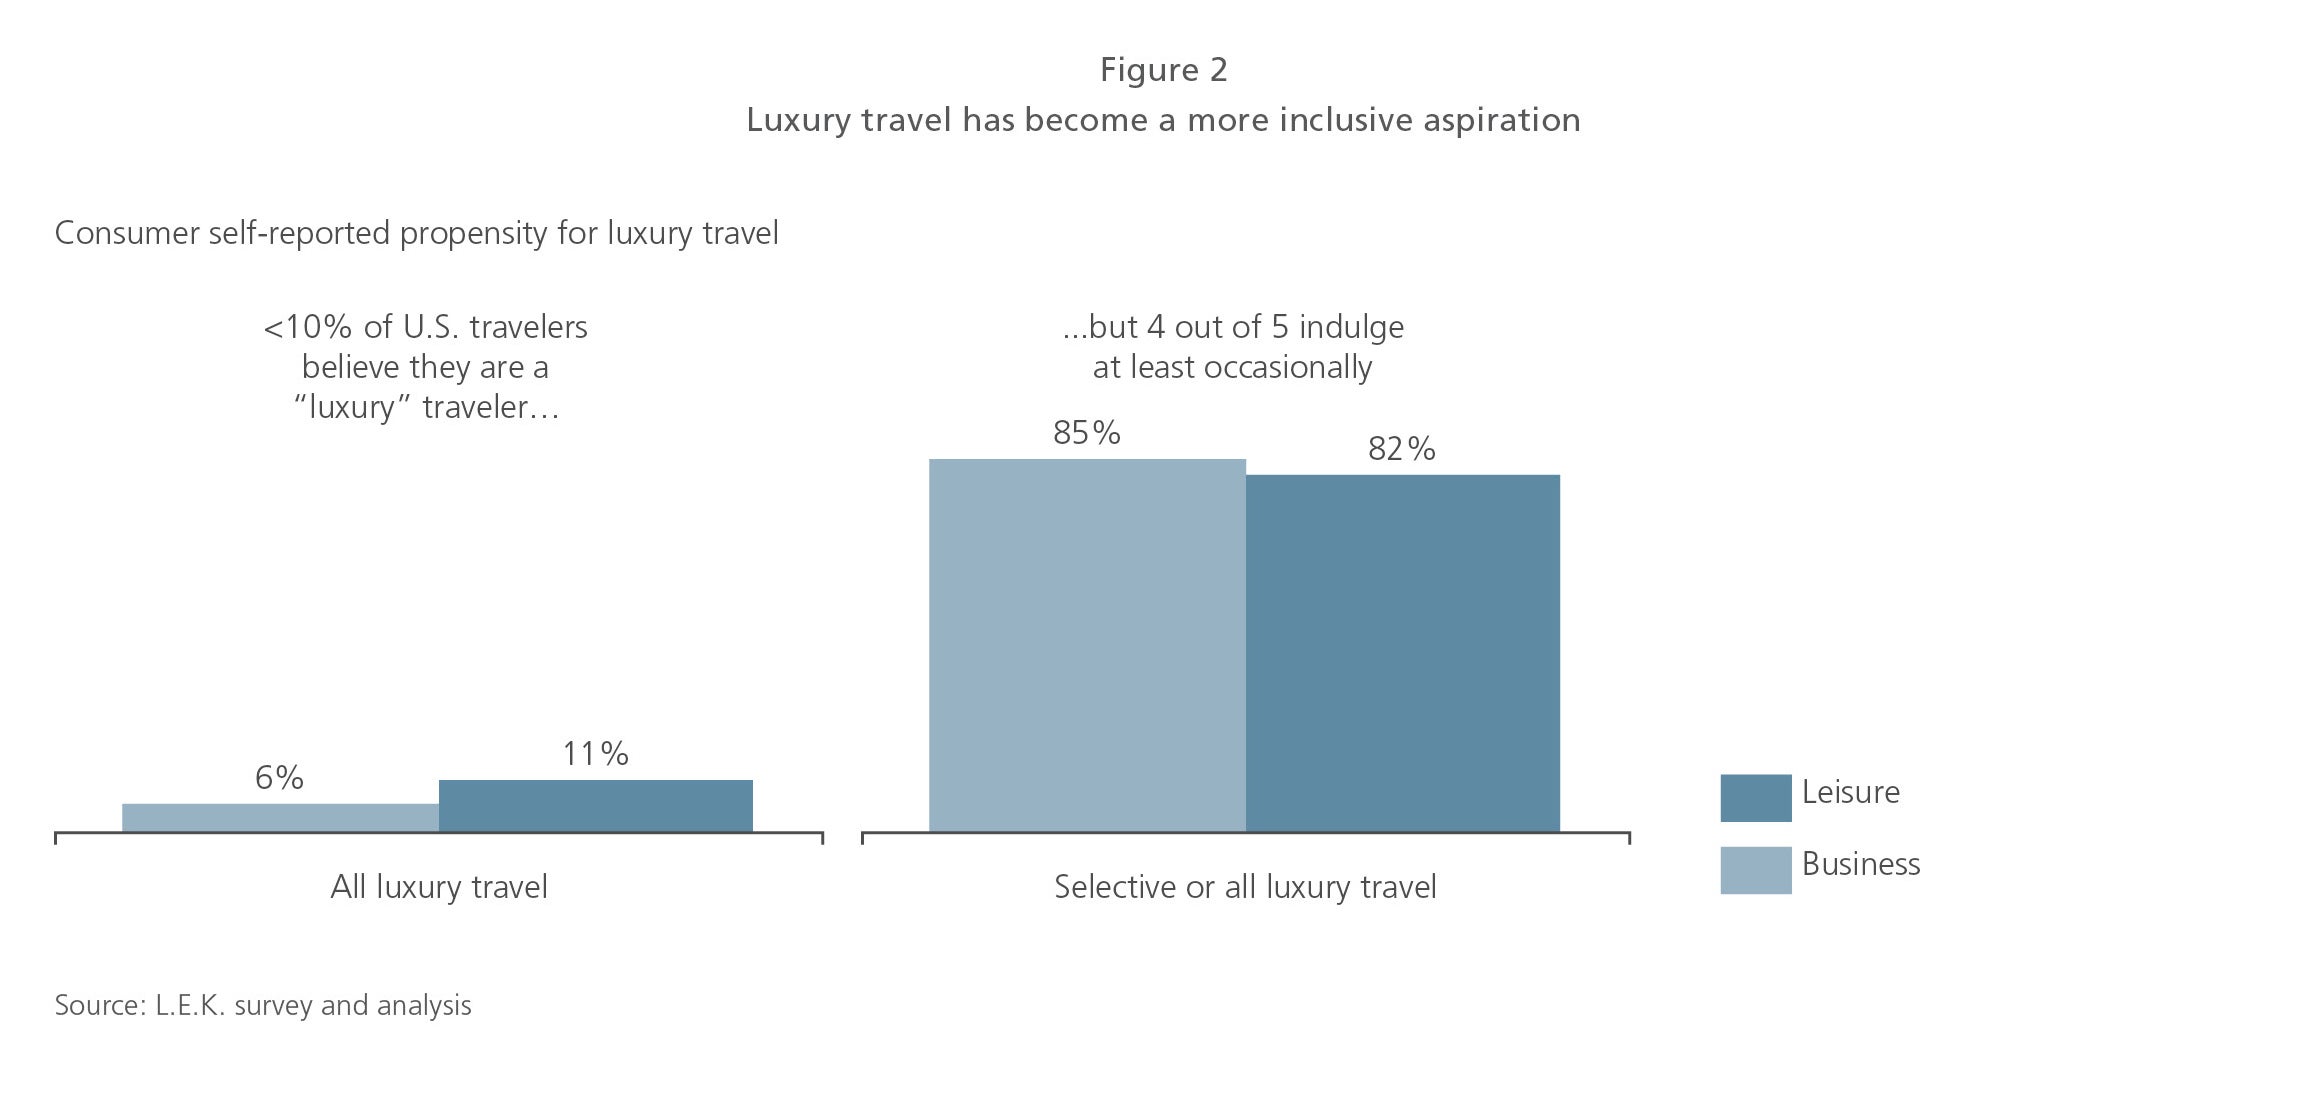 Luxury travel has become a more inclusive aspiration